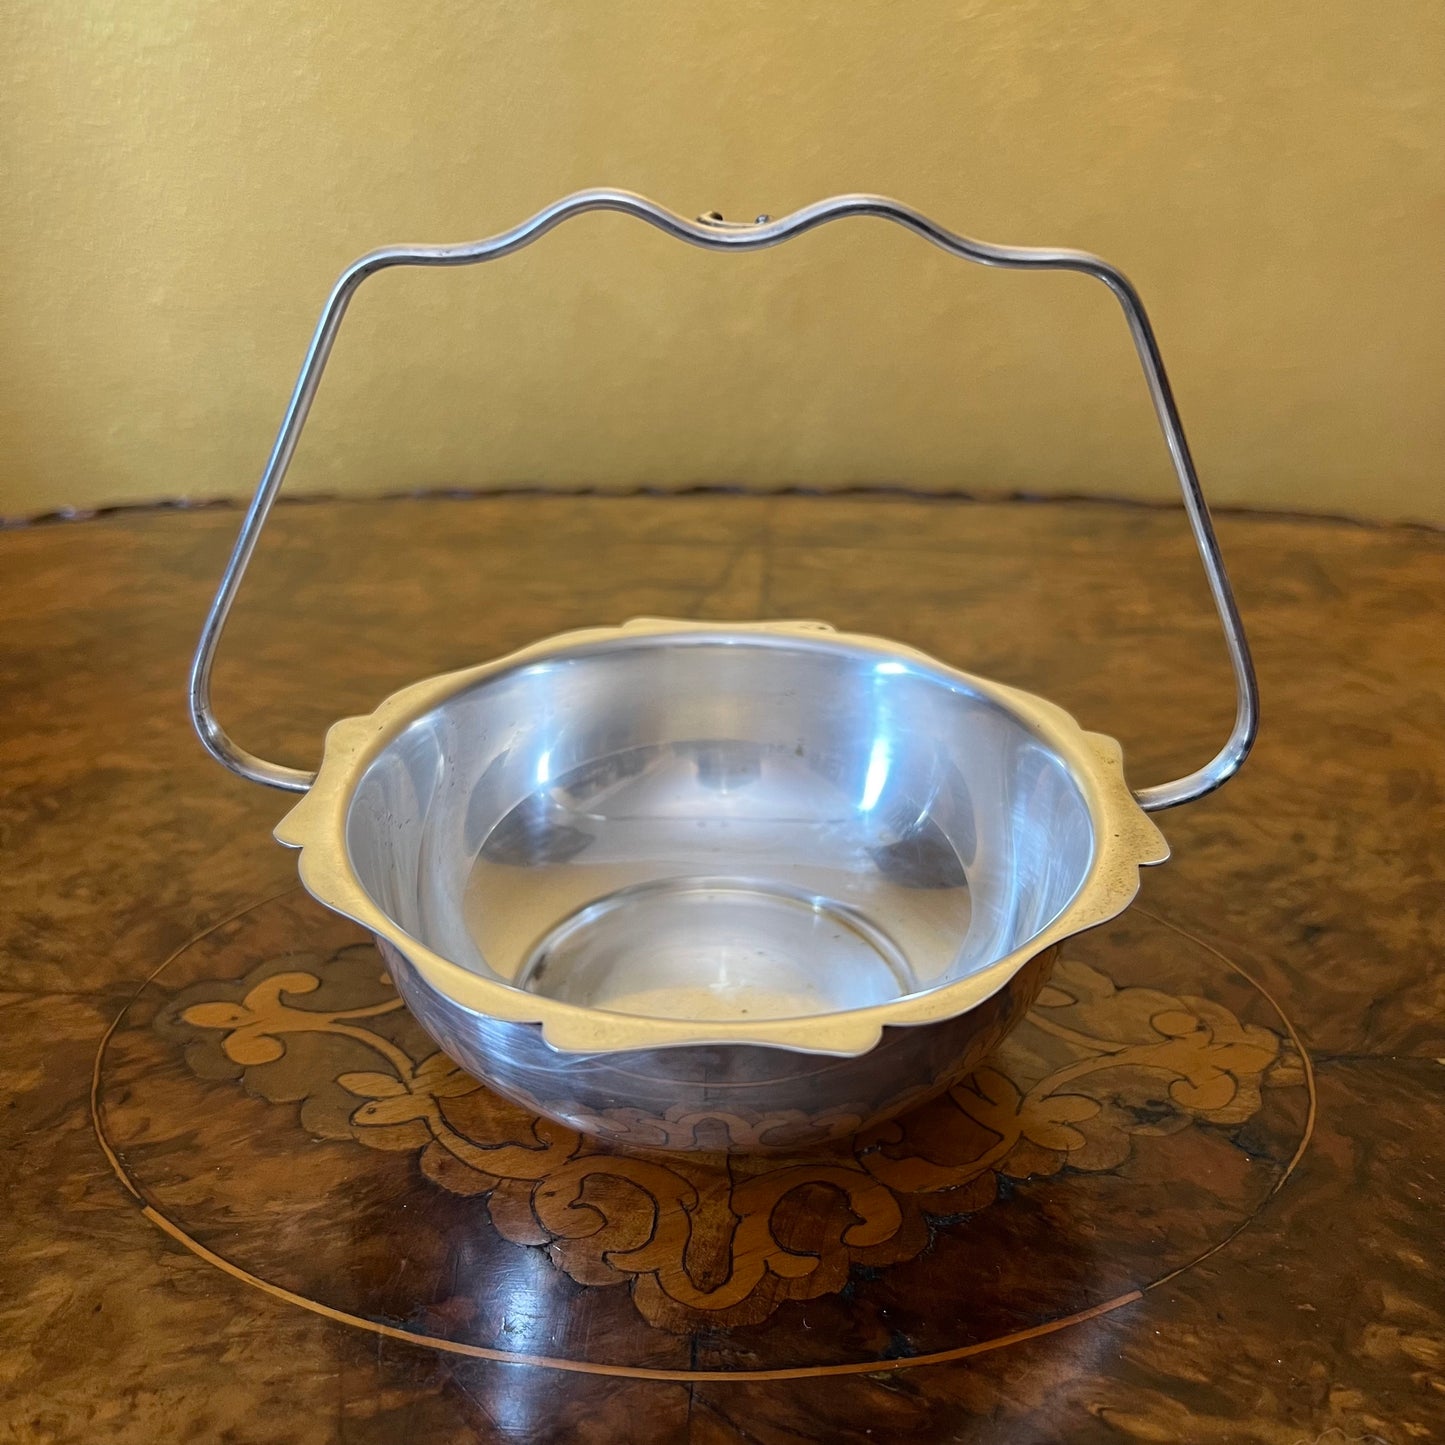 Vintage Imperial Phoenix Silver Plated Bowl With Handle